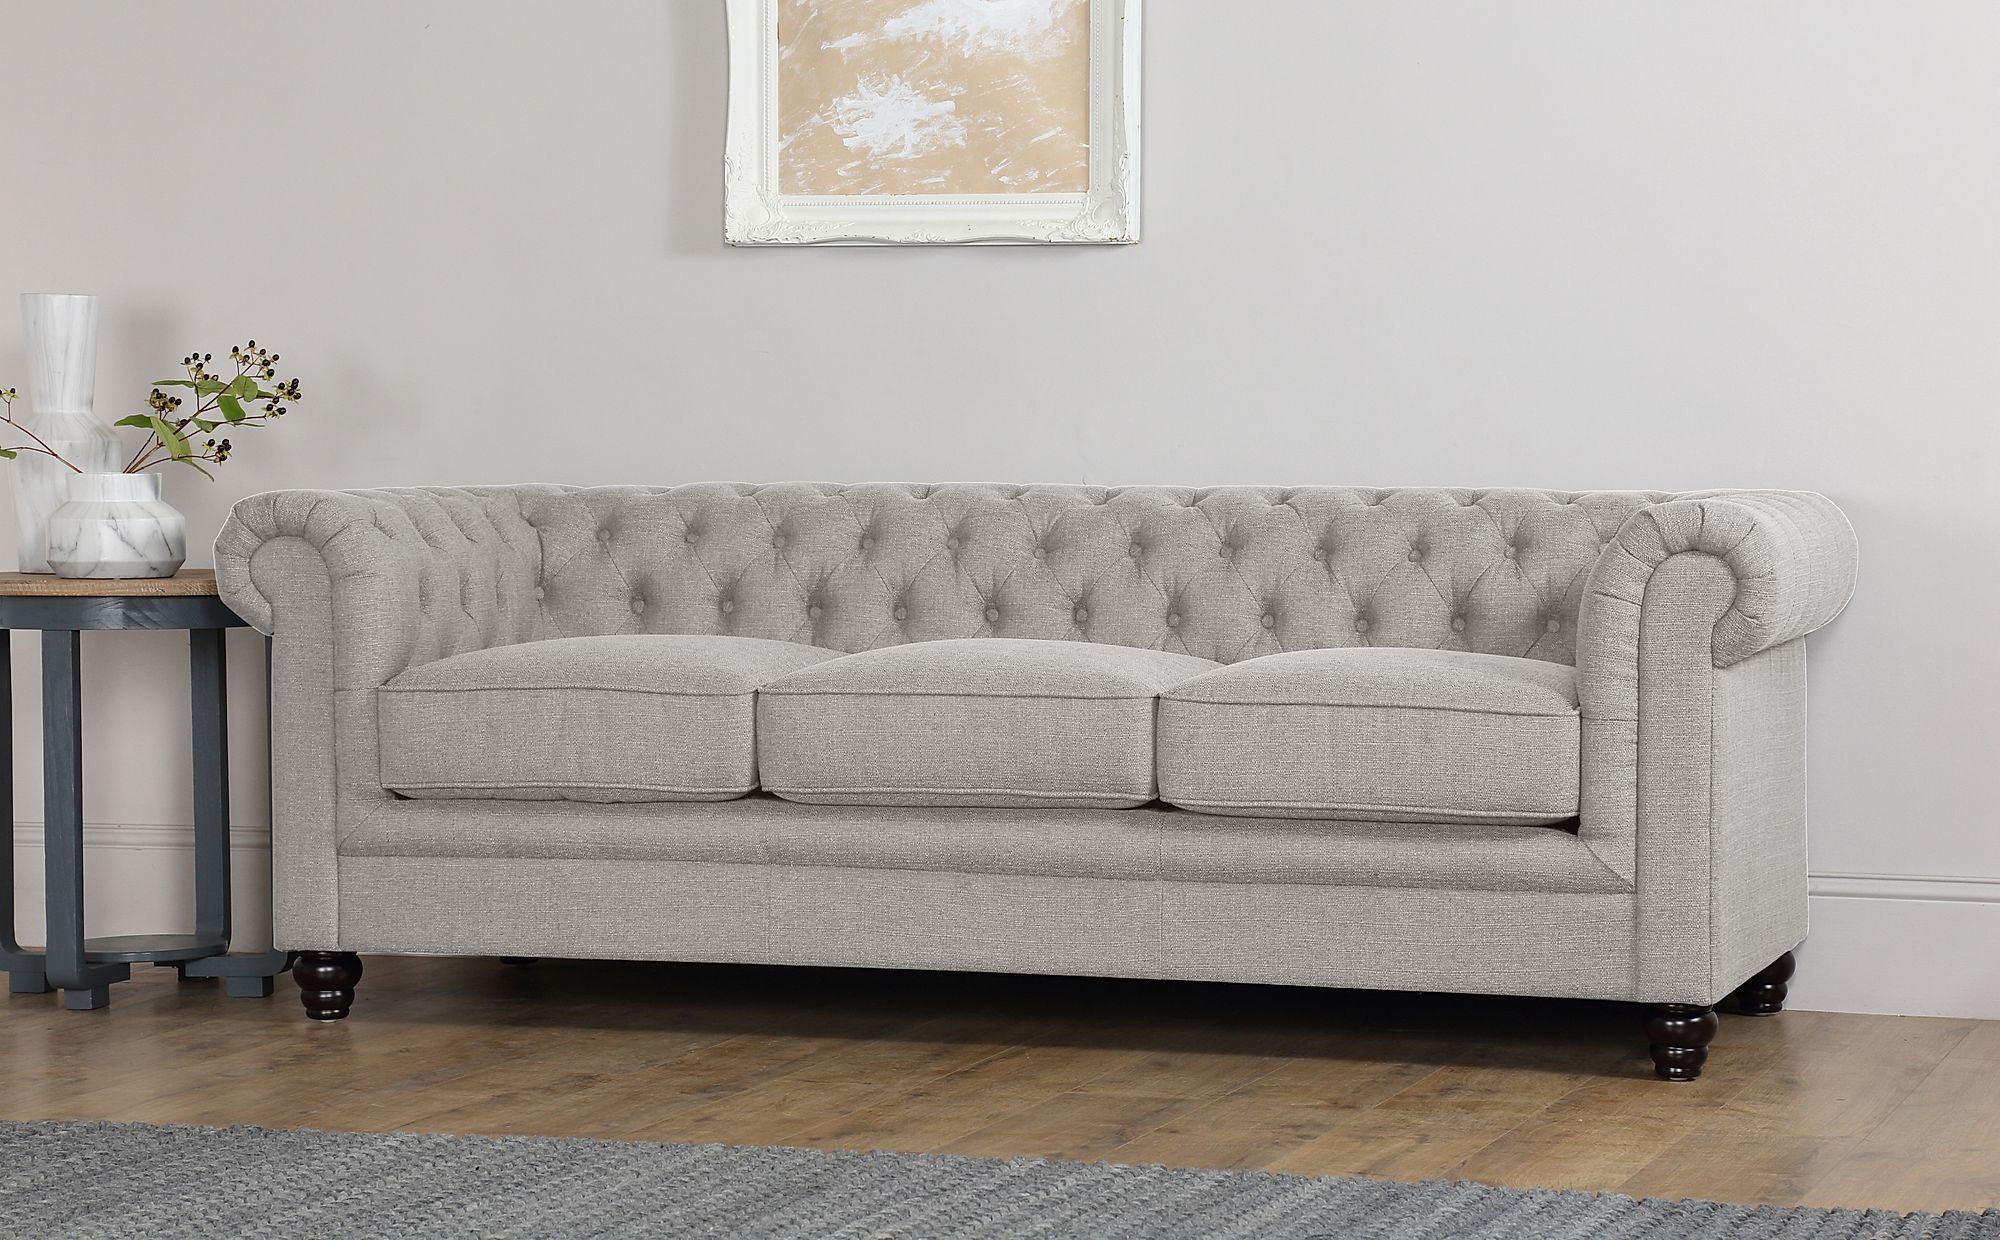 Hampton Light Grey Fabric 3 Seater Chesterfield Sofa | Furniture Choice In Sofas In Light Gray (View 13 of 22)